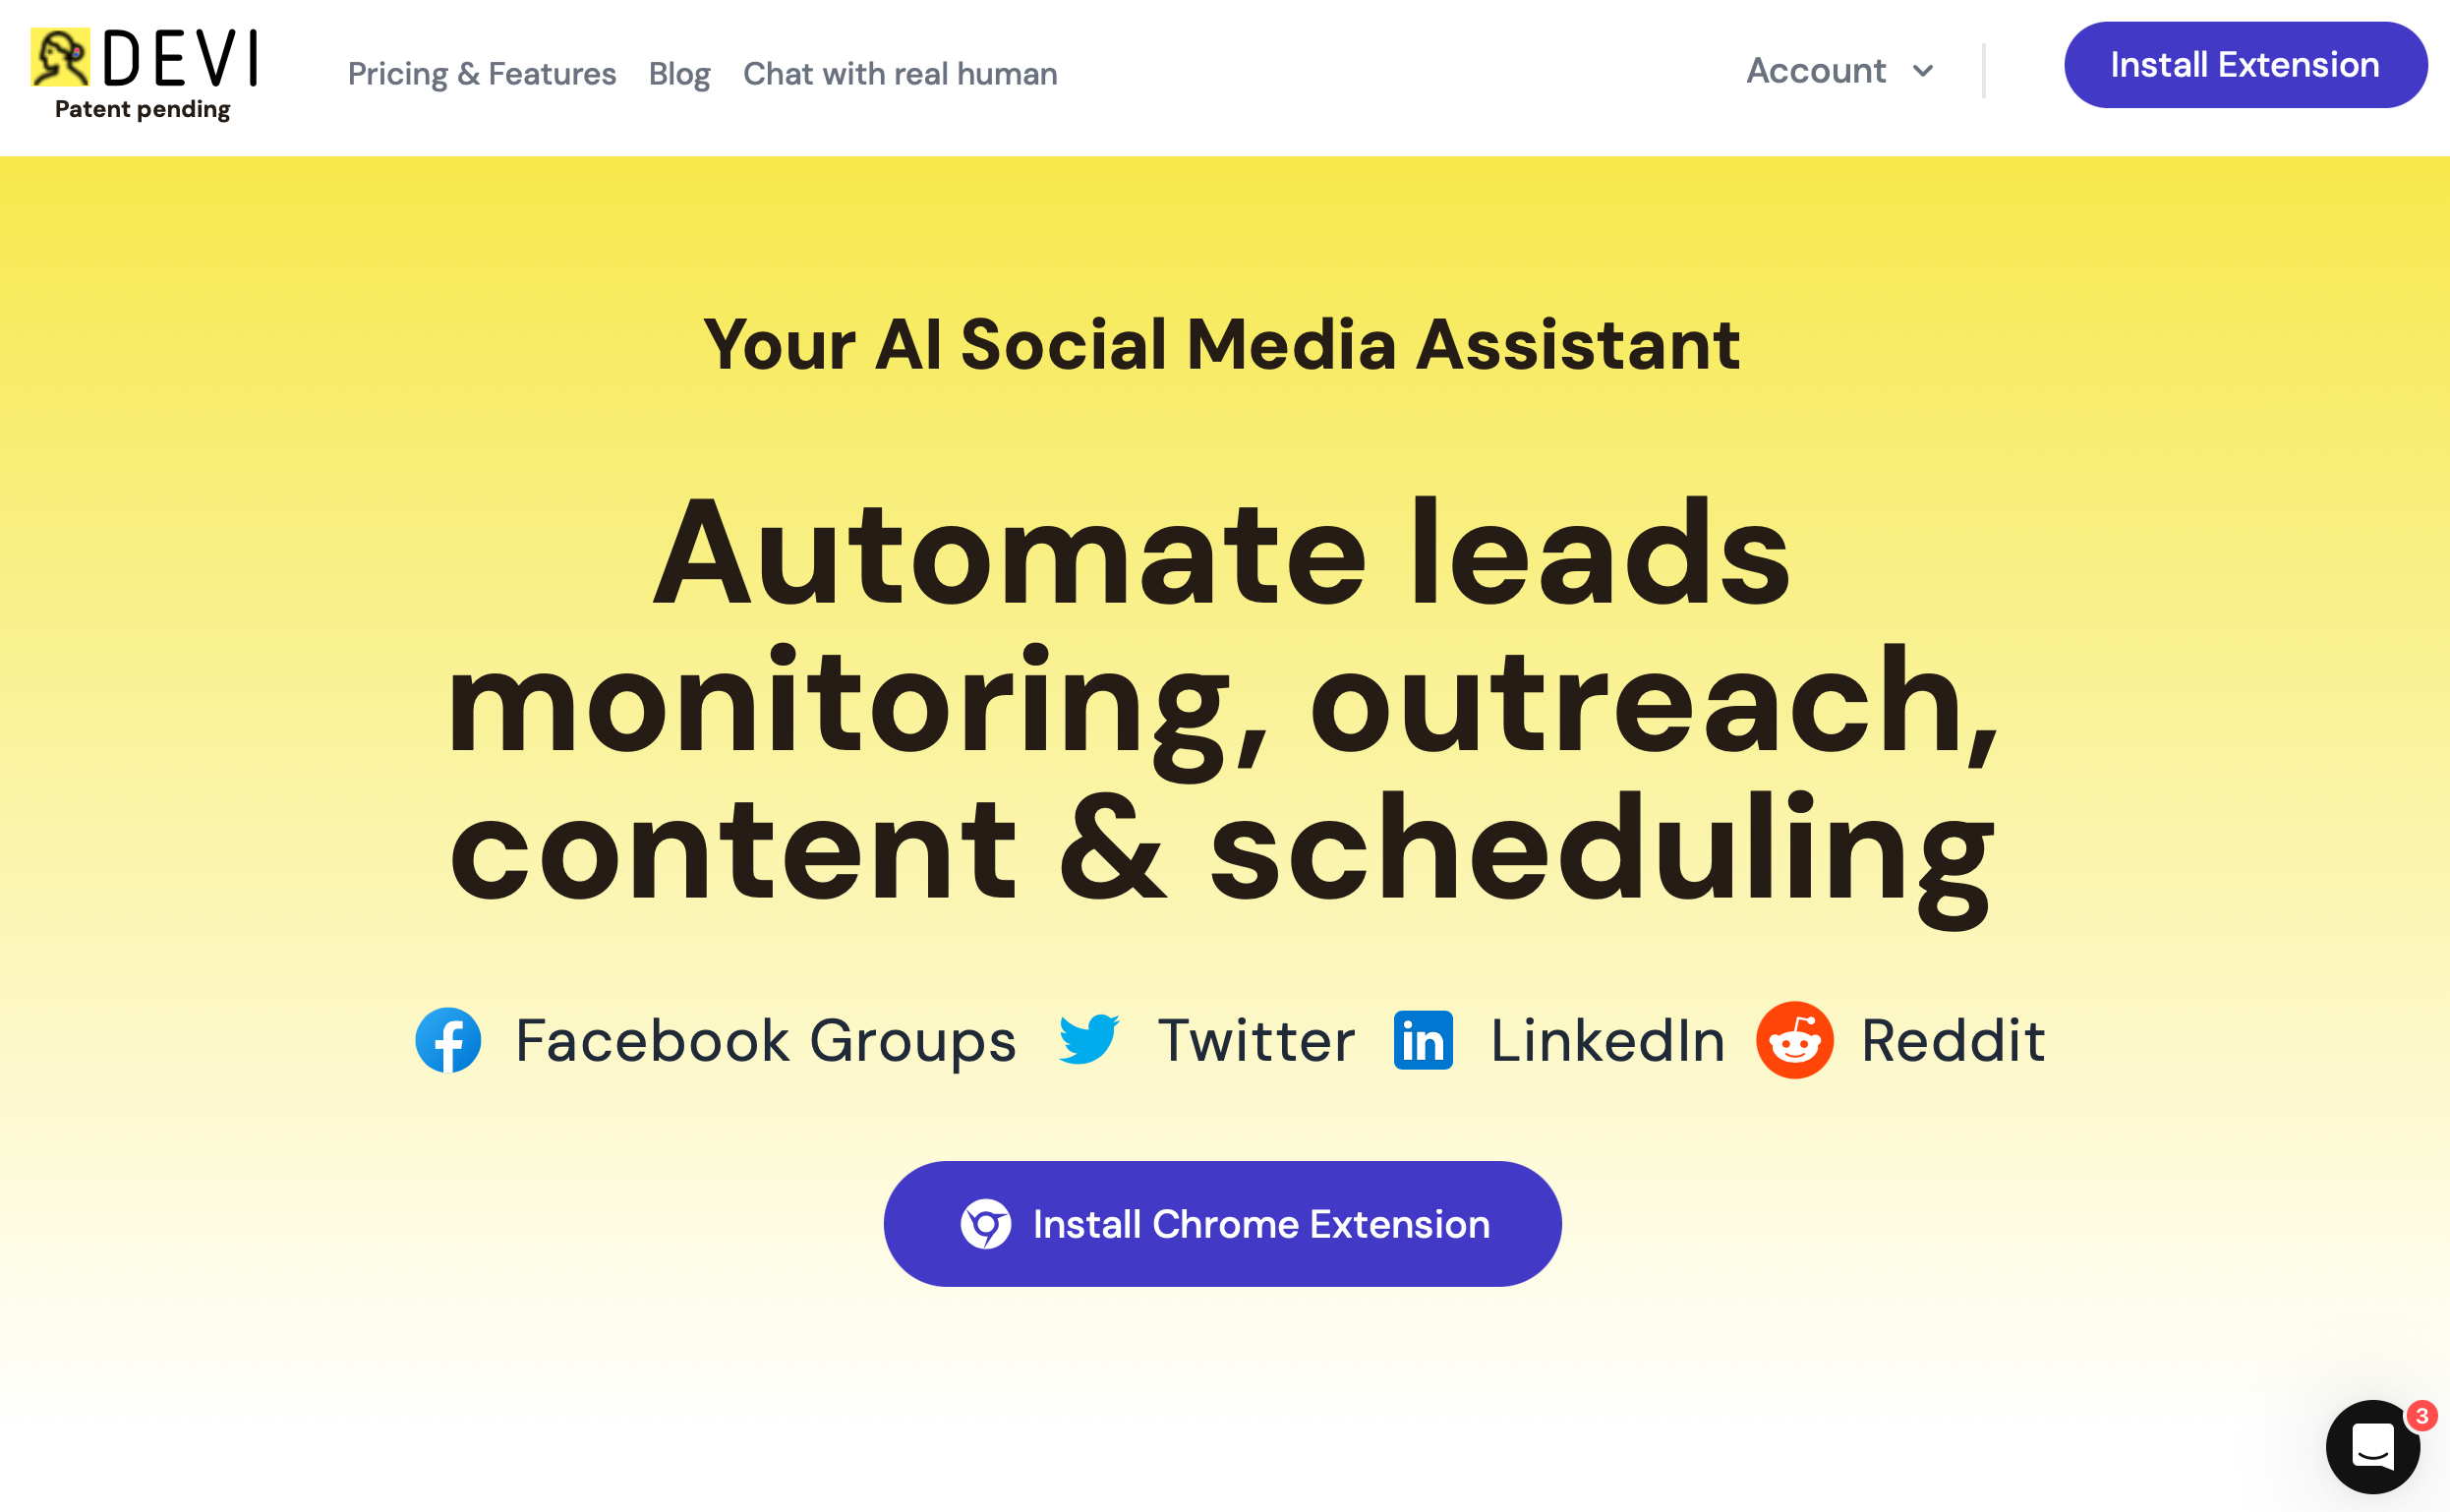 Your AI Social Media Manager